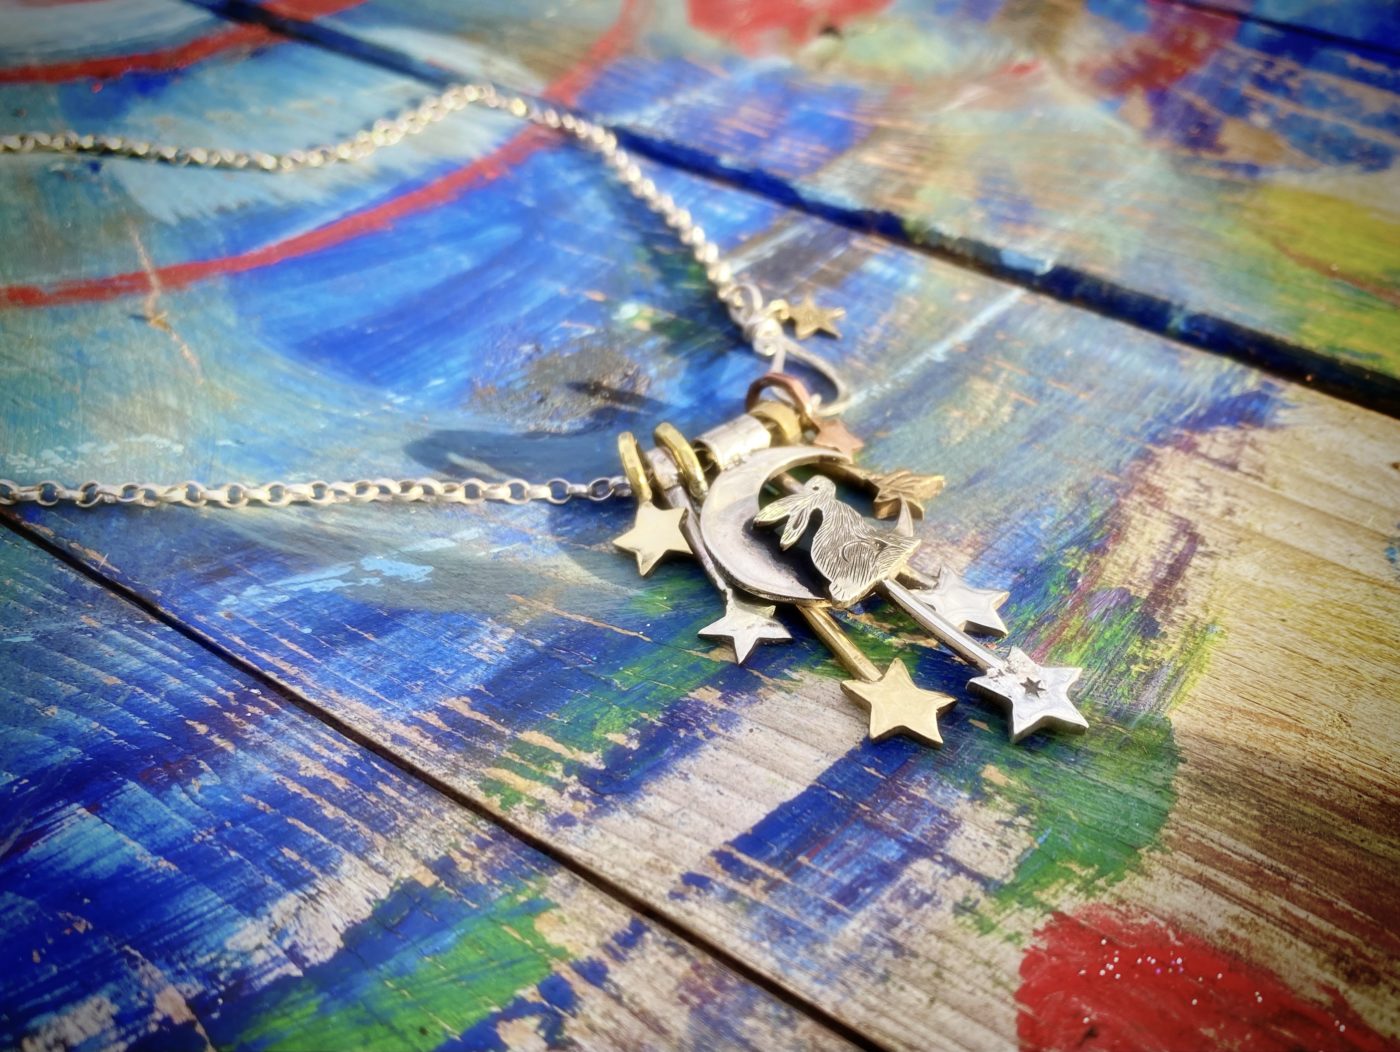 Moon hare jewellery handmade and recycled silver coin necklace made in an independent artisan workshop studio